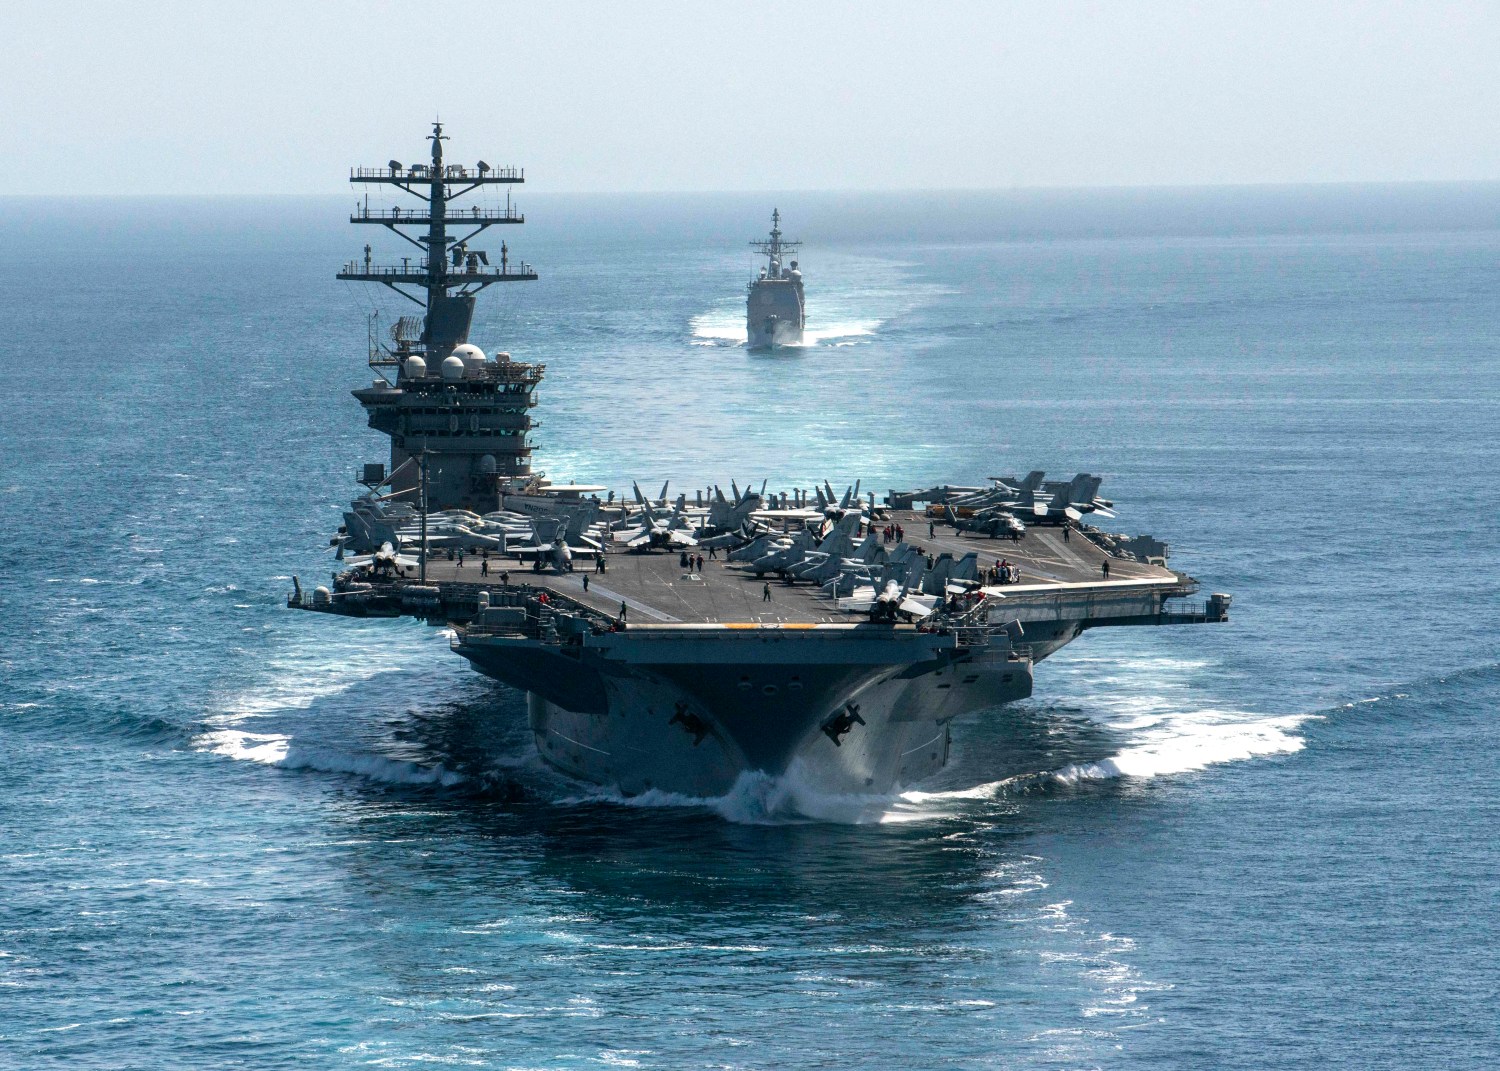 Photo dated September 18, 2020 of the aircraft carrier USS Nimitz (CVN 68) and the guided-missile cruiser USS Philippine Sea (CG 58) steam in formation during a Strait of Hormuz transit. The Nimitz aircraft carrier passed the Strait of Hormuz uneventfully to enter the Gulf Friday, the Navy announced. A strike group led by the USS Nimitz and including two guided-missile cruisers and a guided-missile destroyer sailed into the Gulf to operate and train with US partners and support the coalition fighting the Islamic State (ISIS) group, the US 5th Fleet added in a statement. The Nimitz, Americas oldest carrier in active service, carries some 5,000 sailors and Marines. U.S. Navy photo by Mass Communication Specialist 3rd Class Elliot Schaudt via ABACAPRESS.COM